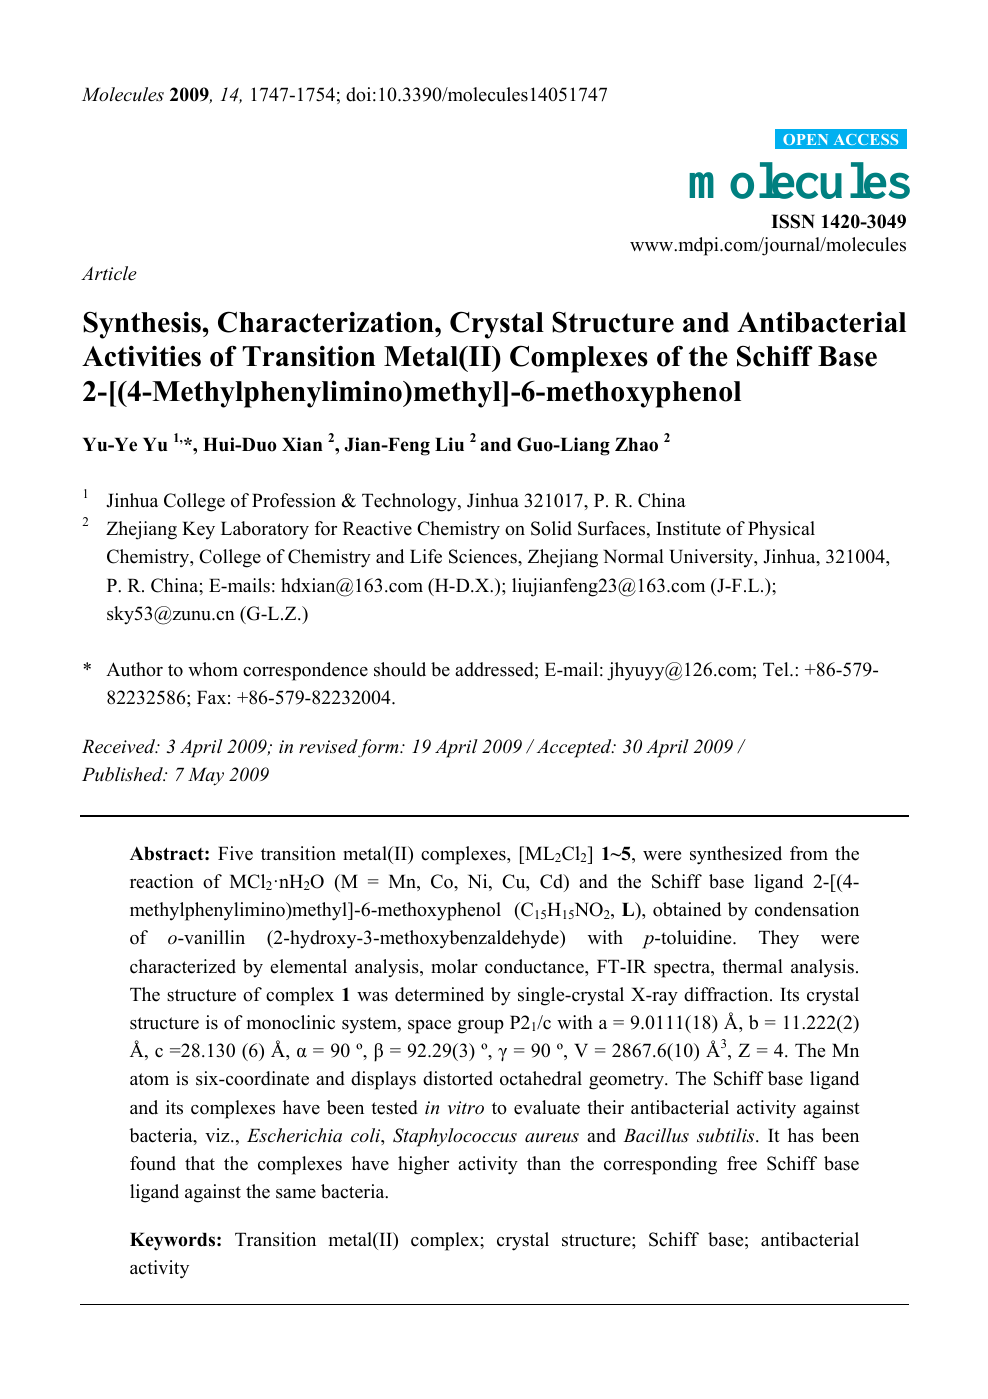 Synthesis Characterization Crystal Structure And Antibacterial Activities Of Transition Metal Ii Complexes Of The Schiff Base 2 4 Methylphenylimino Methyl 6 Methoxyphenol Topic Of Research Paper In Chemical Sciences Download Scholarly Article